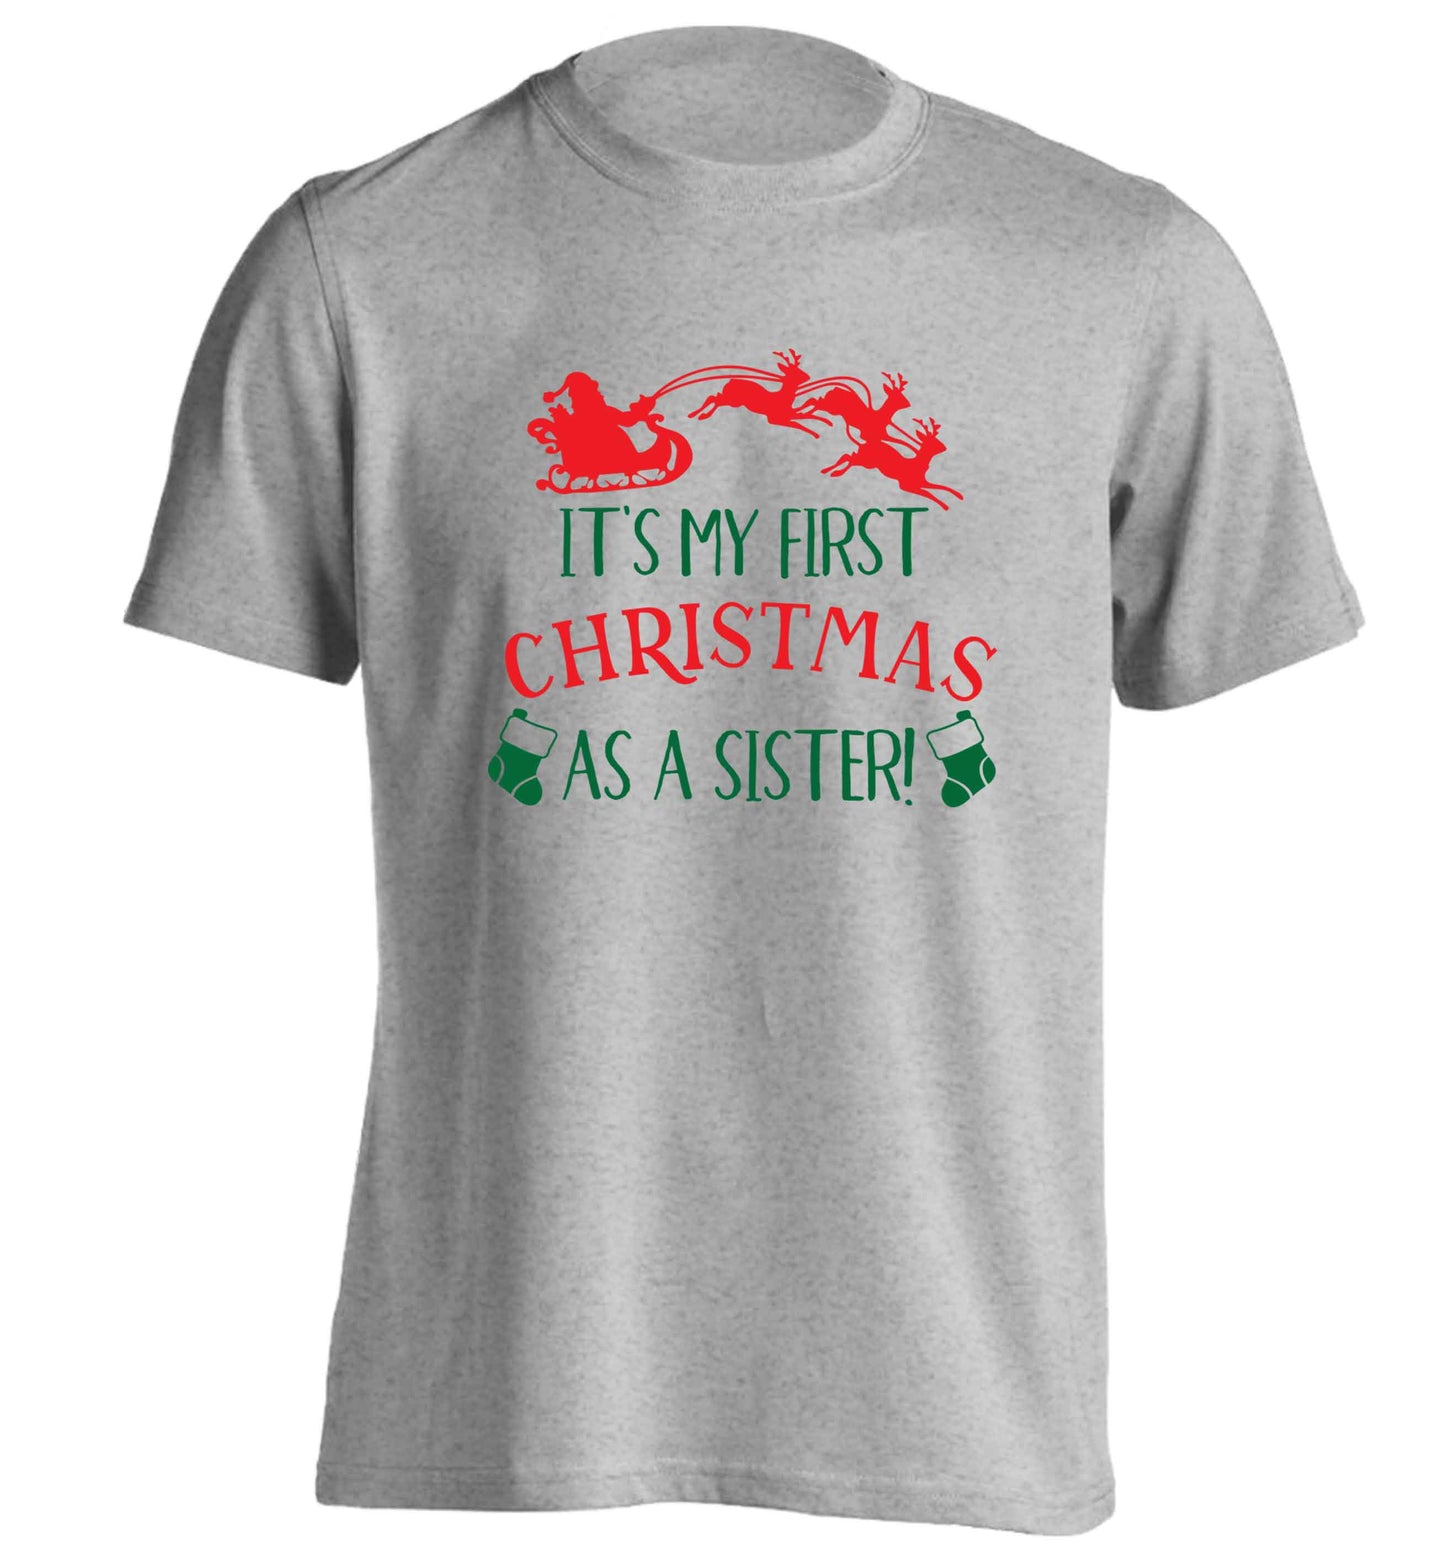 It's my first Christmas as a sister! adults unisex grey Tshirt 2XL